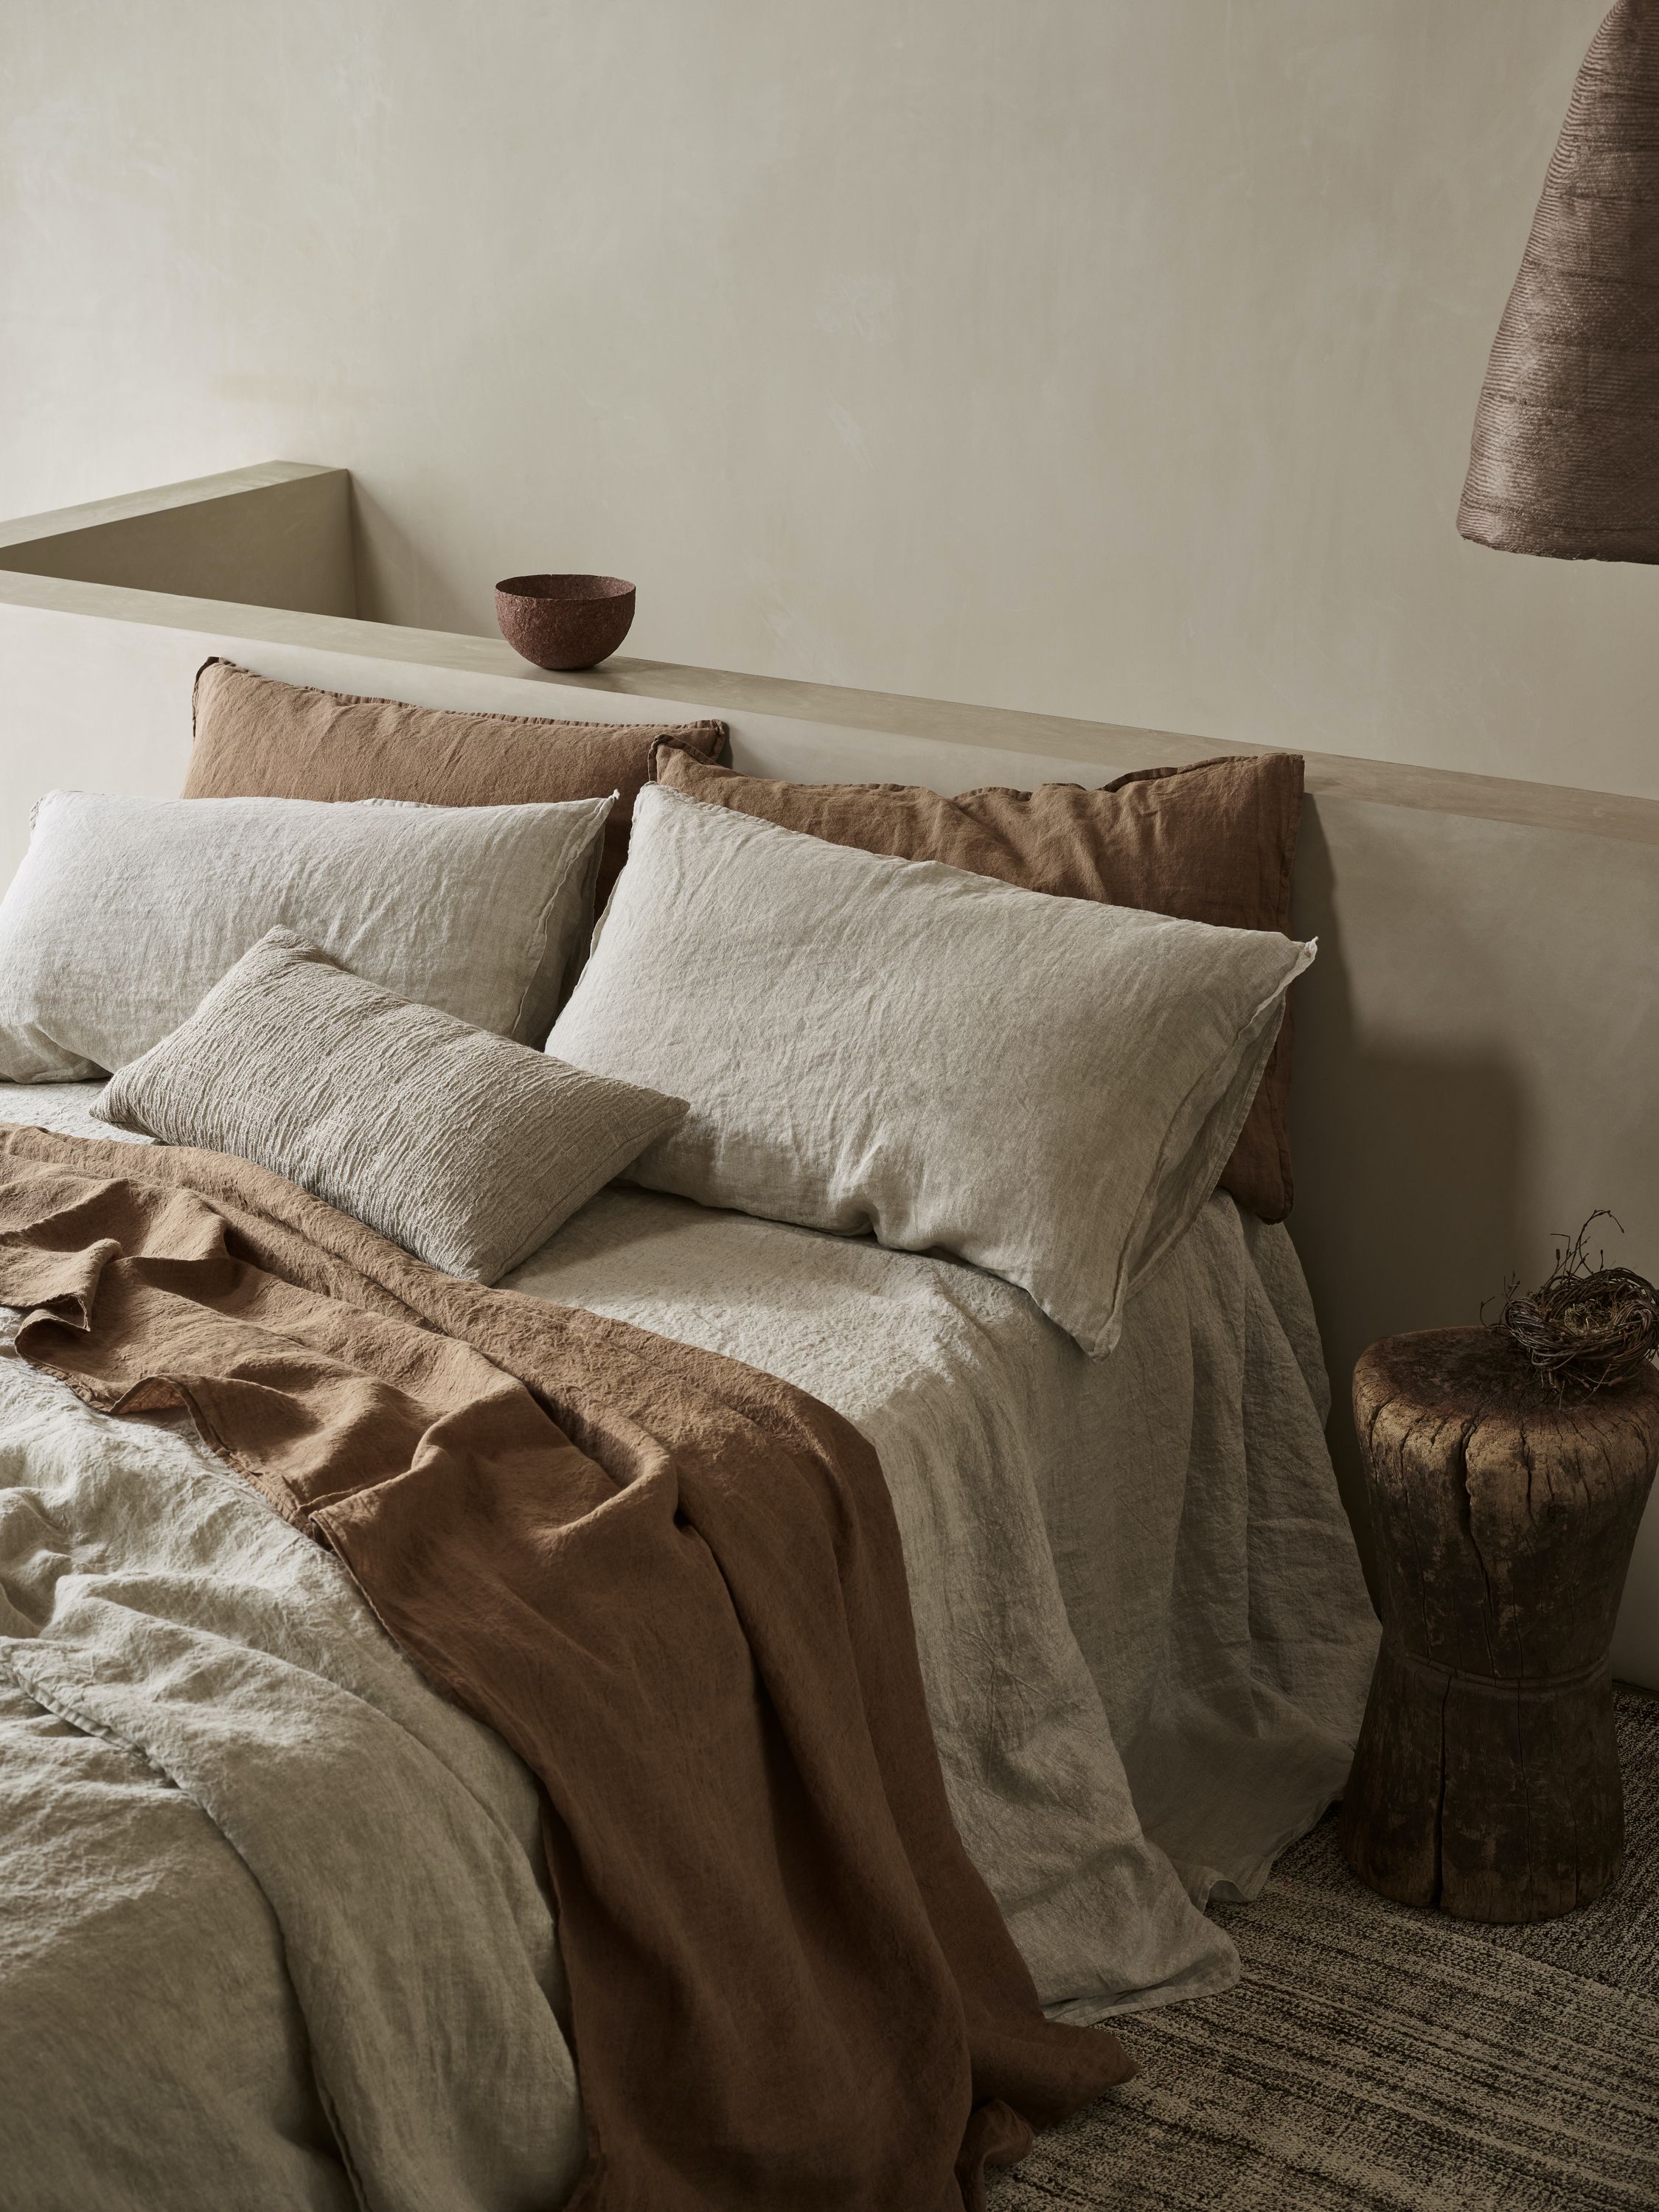 Bedding down: the best bed linen sets